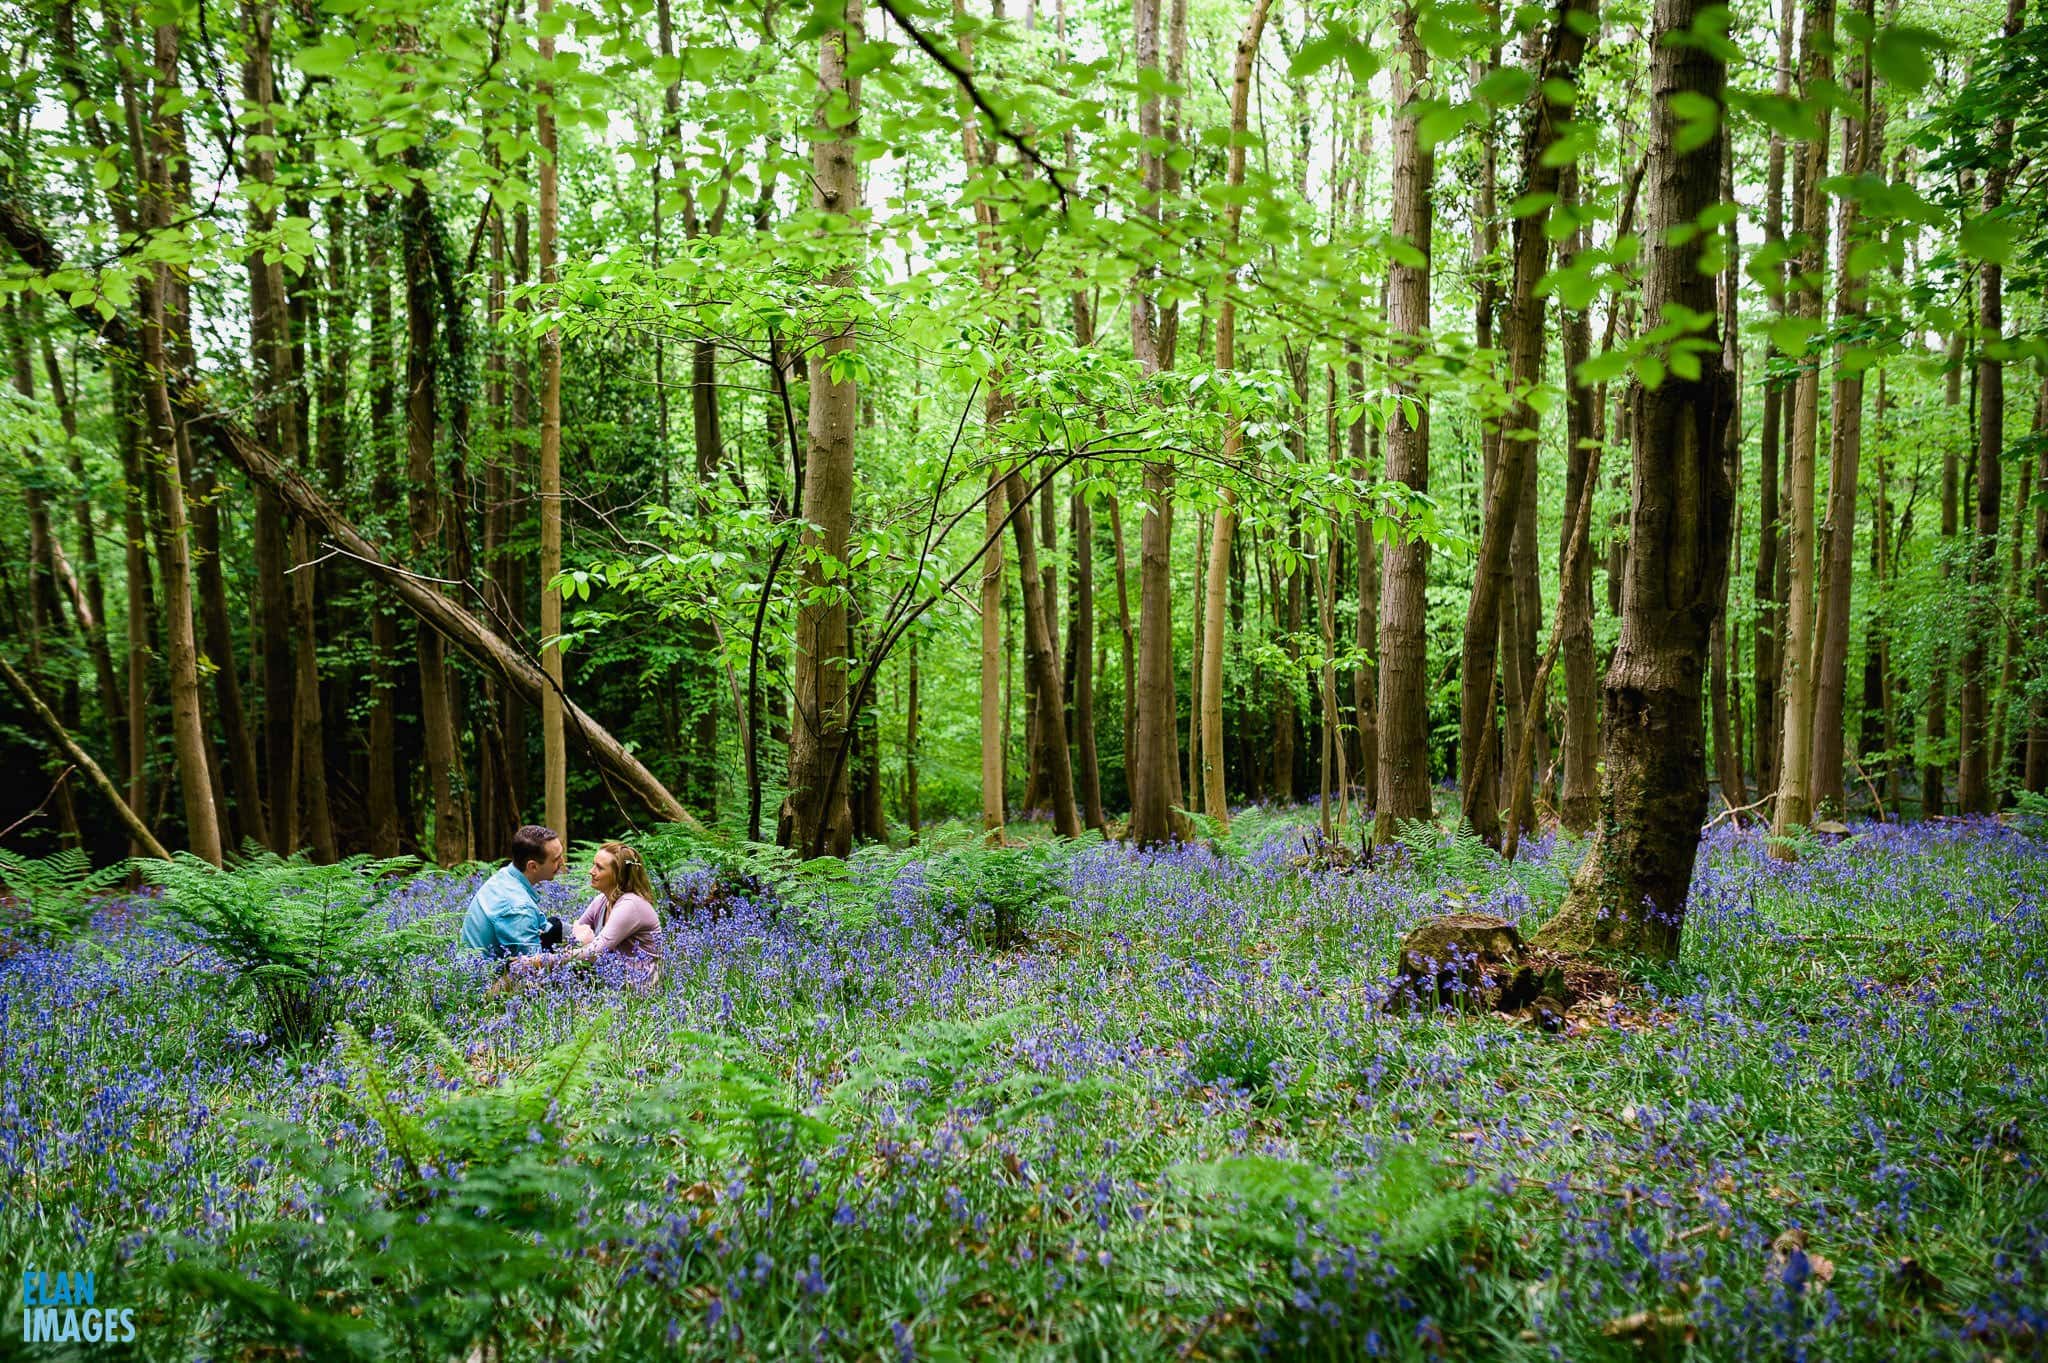 Engagement Photo Shoot in the Bluebell Woods near Bristol 21